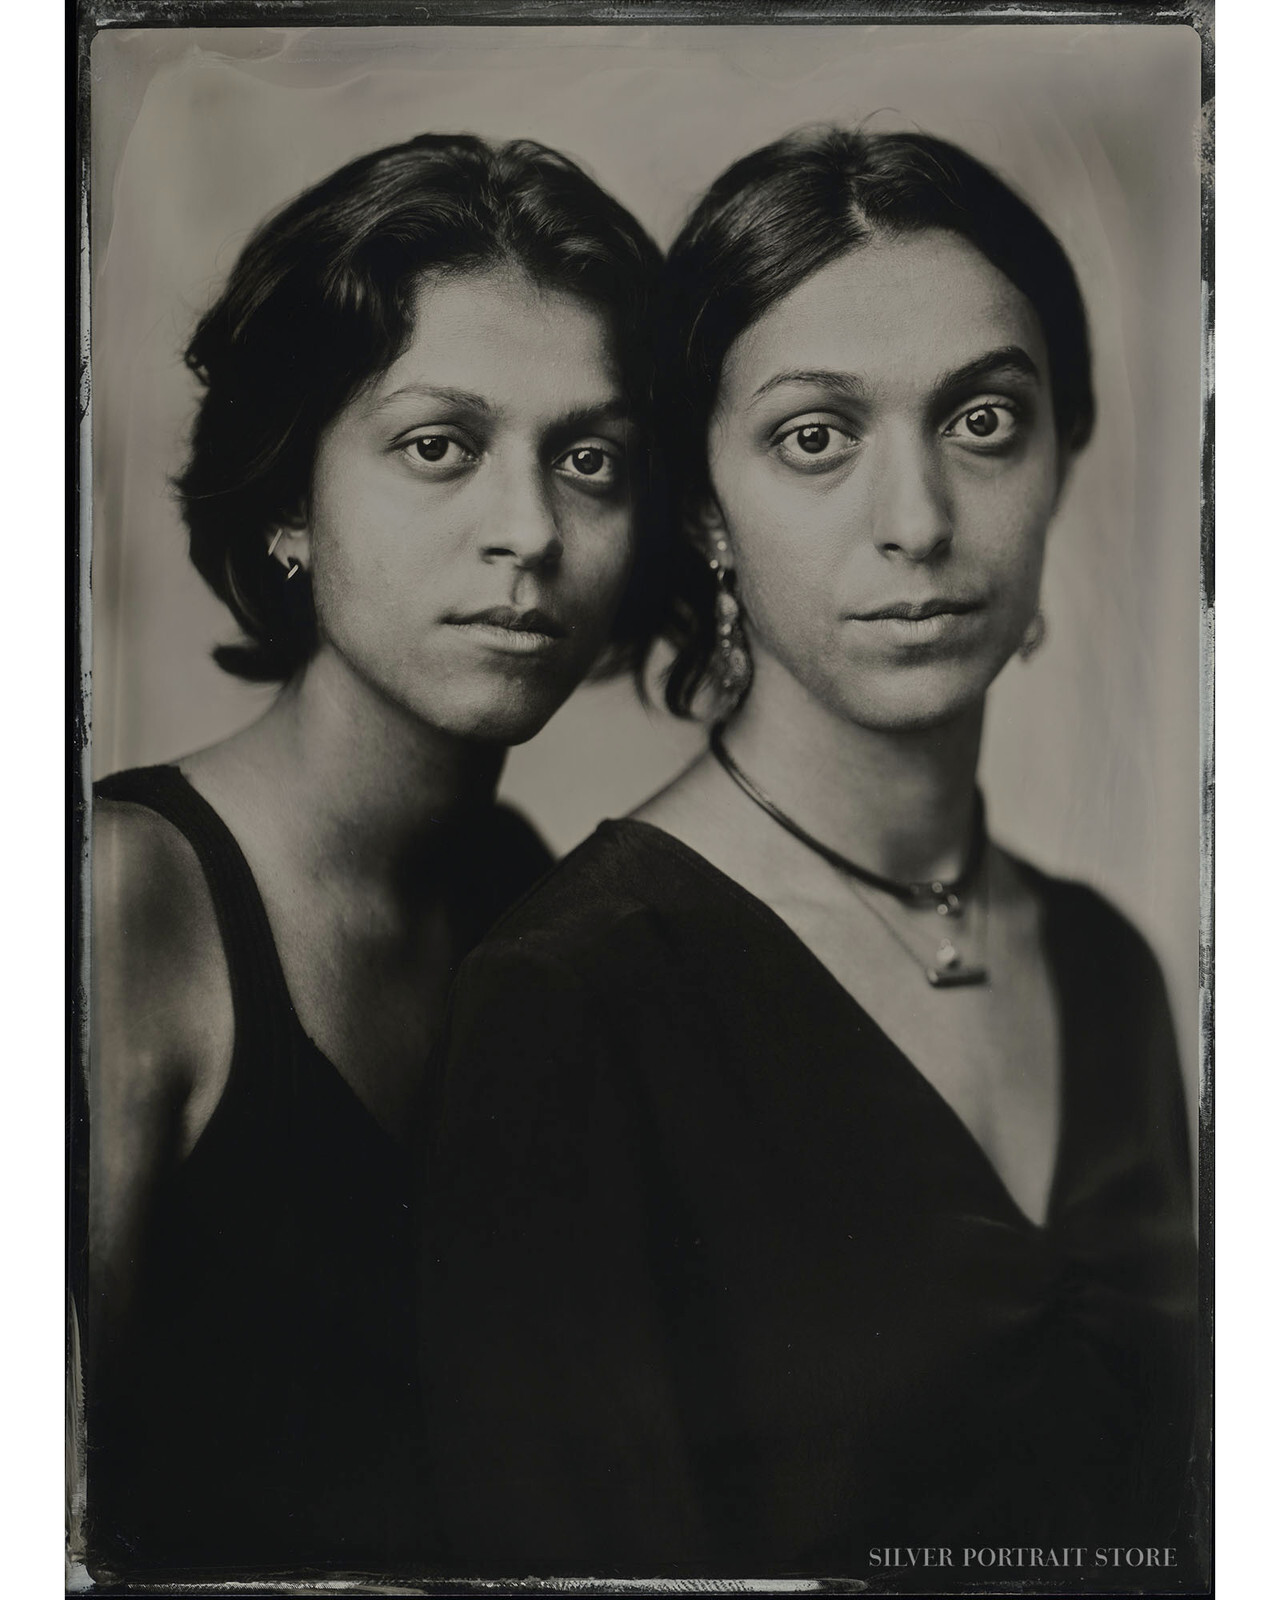 Maria & Mariana-Silver Portrait Store-Wet plate collodion-Tintype 13 x 18 cm.